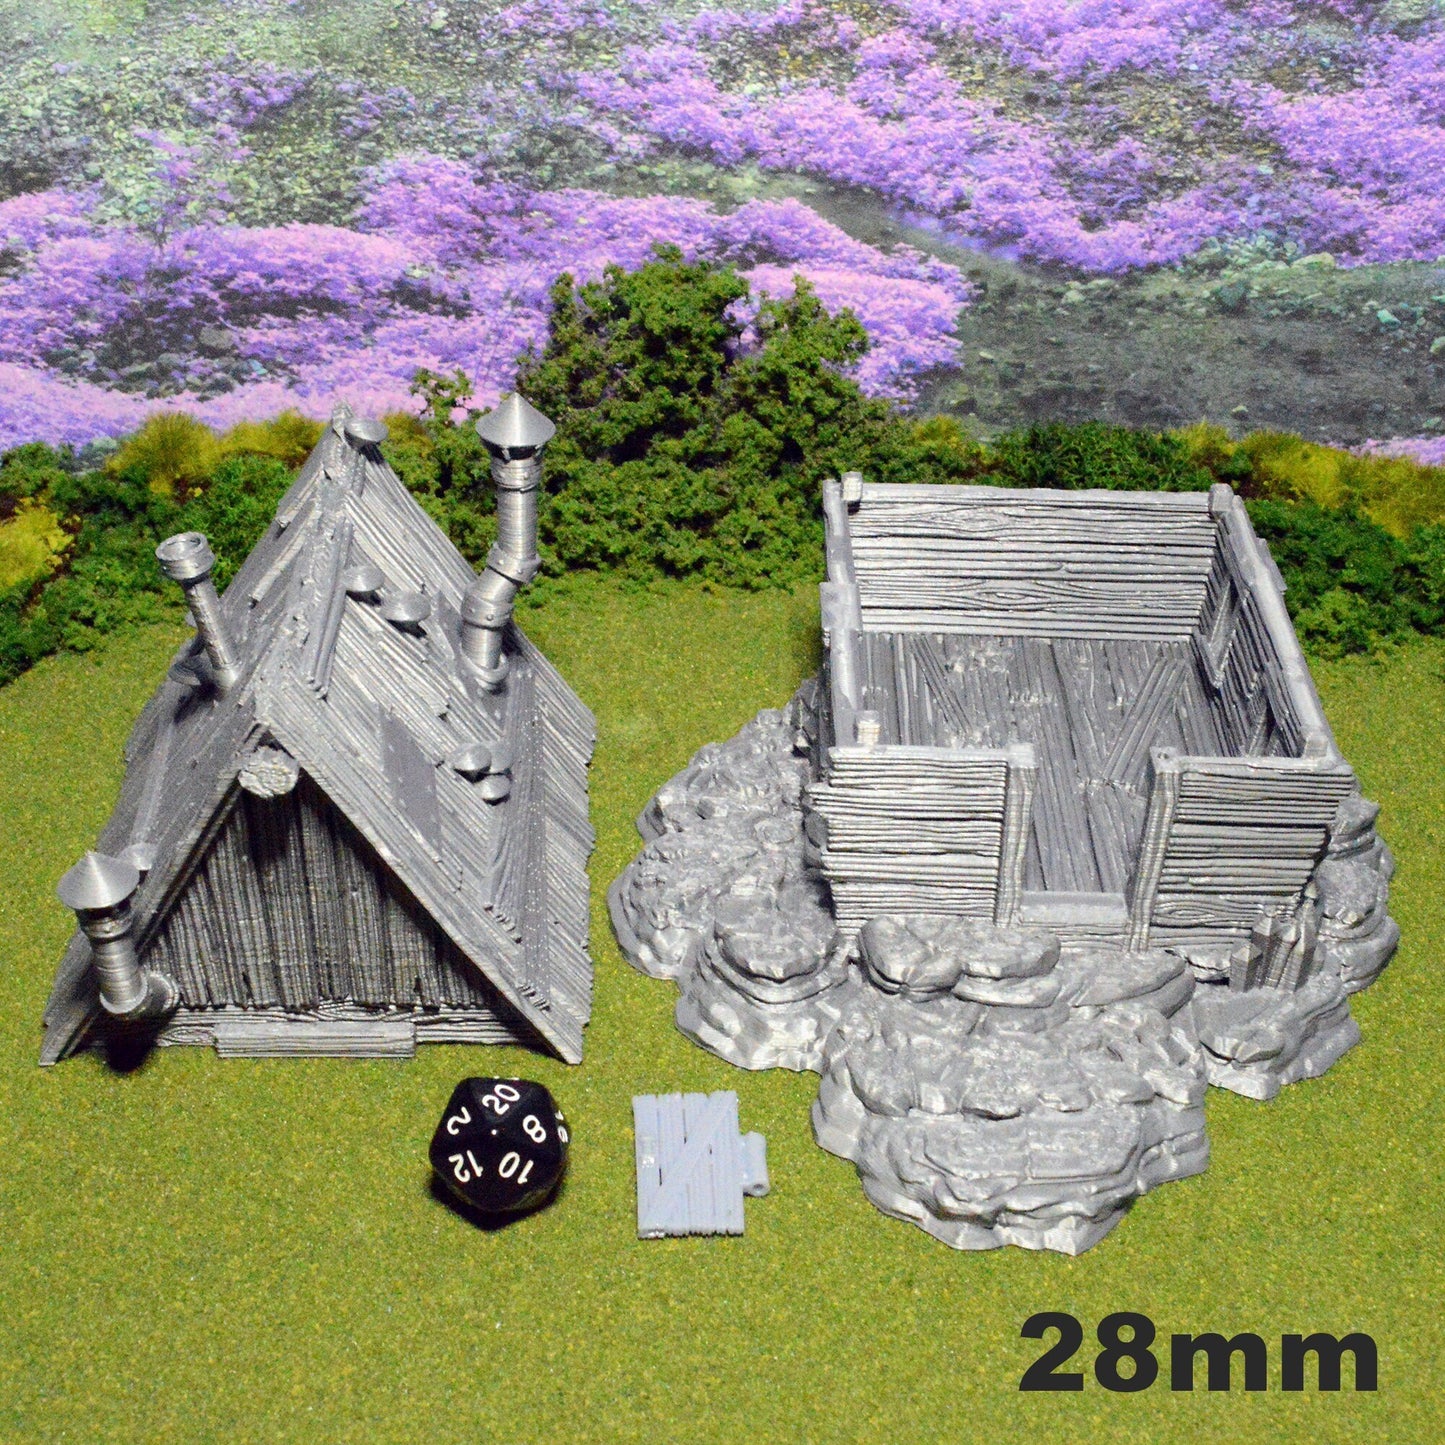 Miniature Cavern House Shack for D&D Terrain 15mm 28mm 32mm, Grotto Goblin Shanty for DnD Pathfinder Fantasy RPGs, Gift for Tabletop Gamers